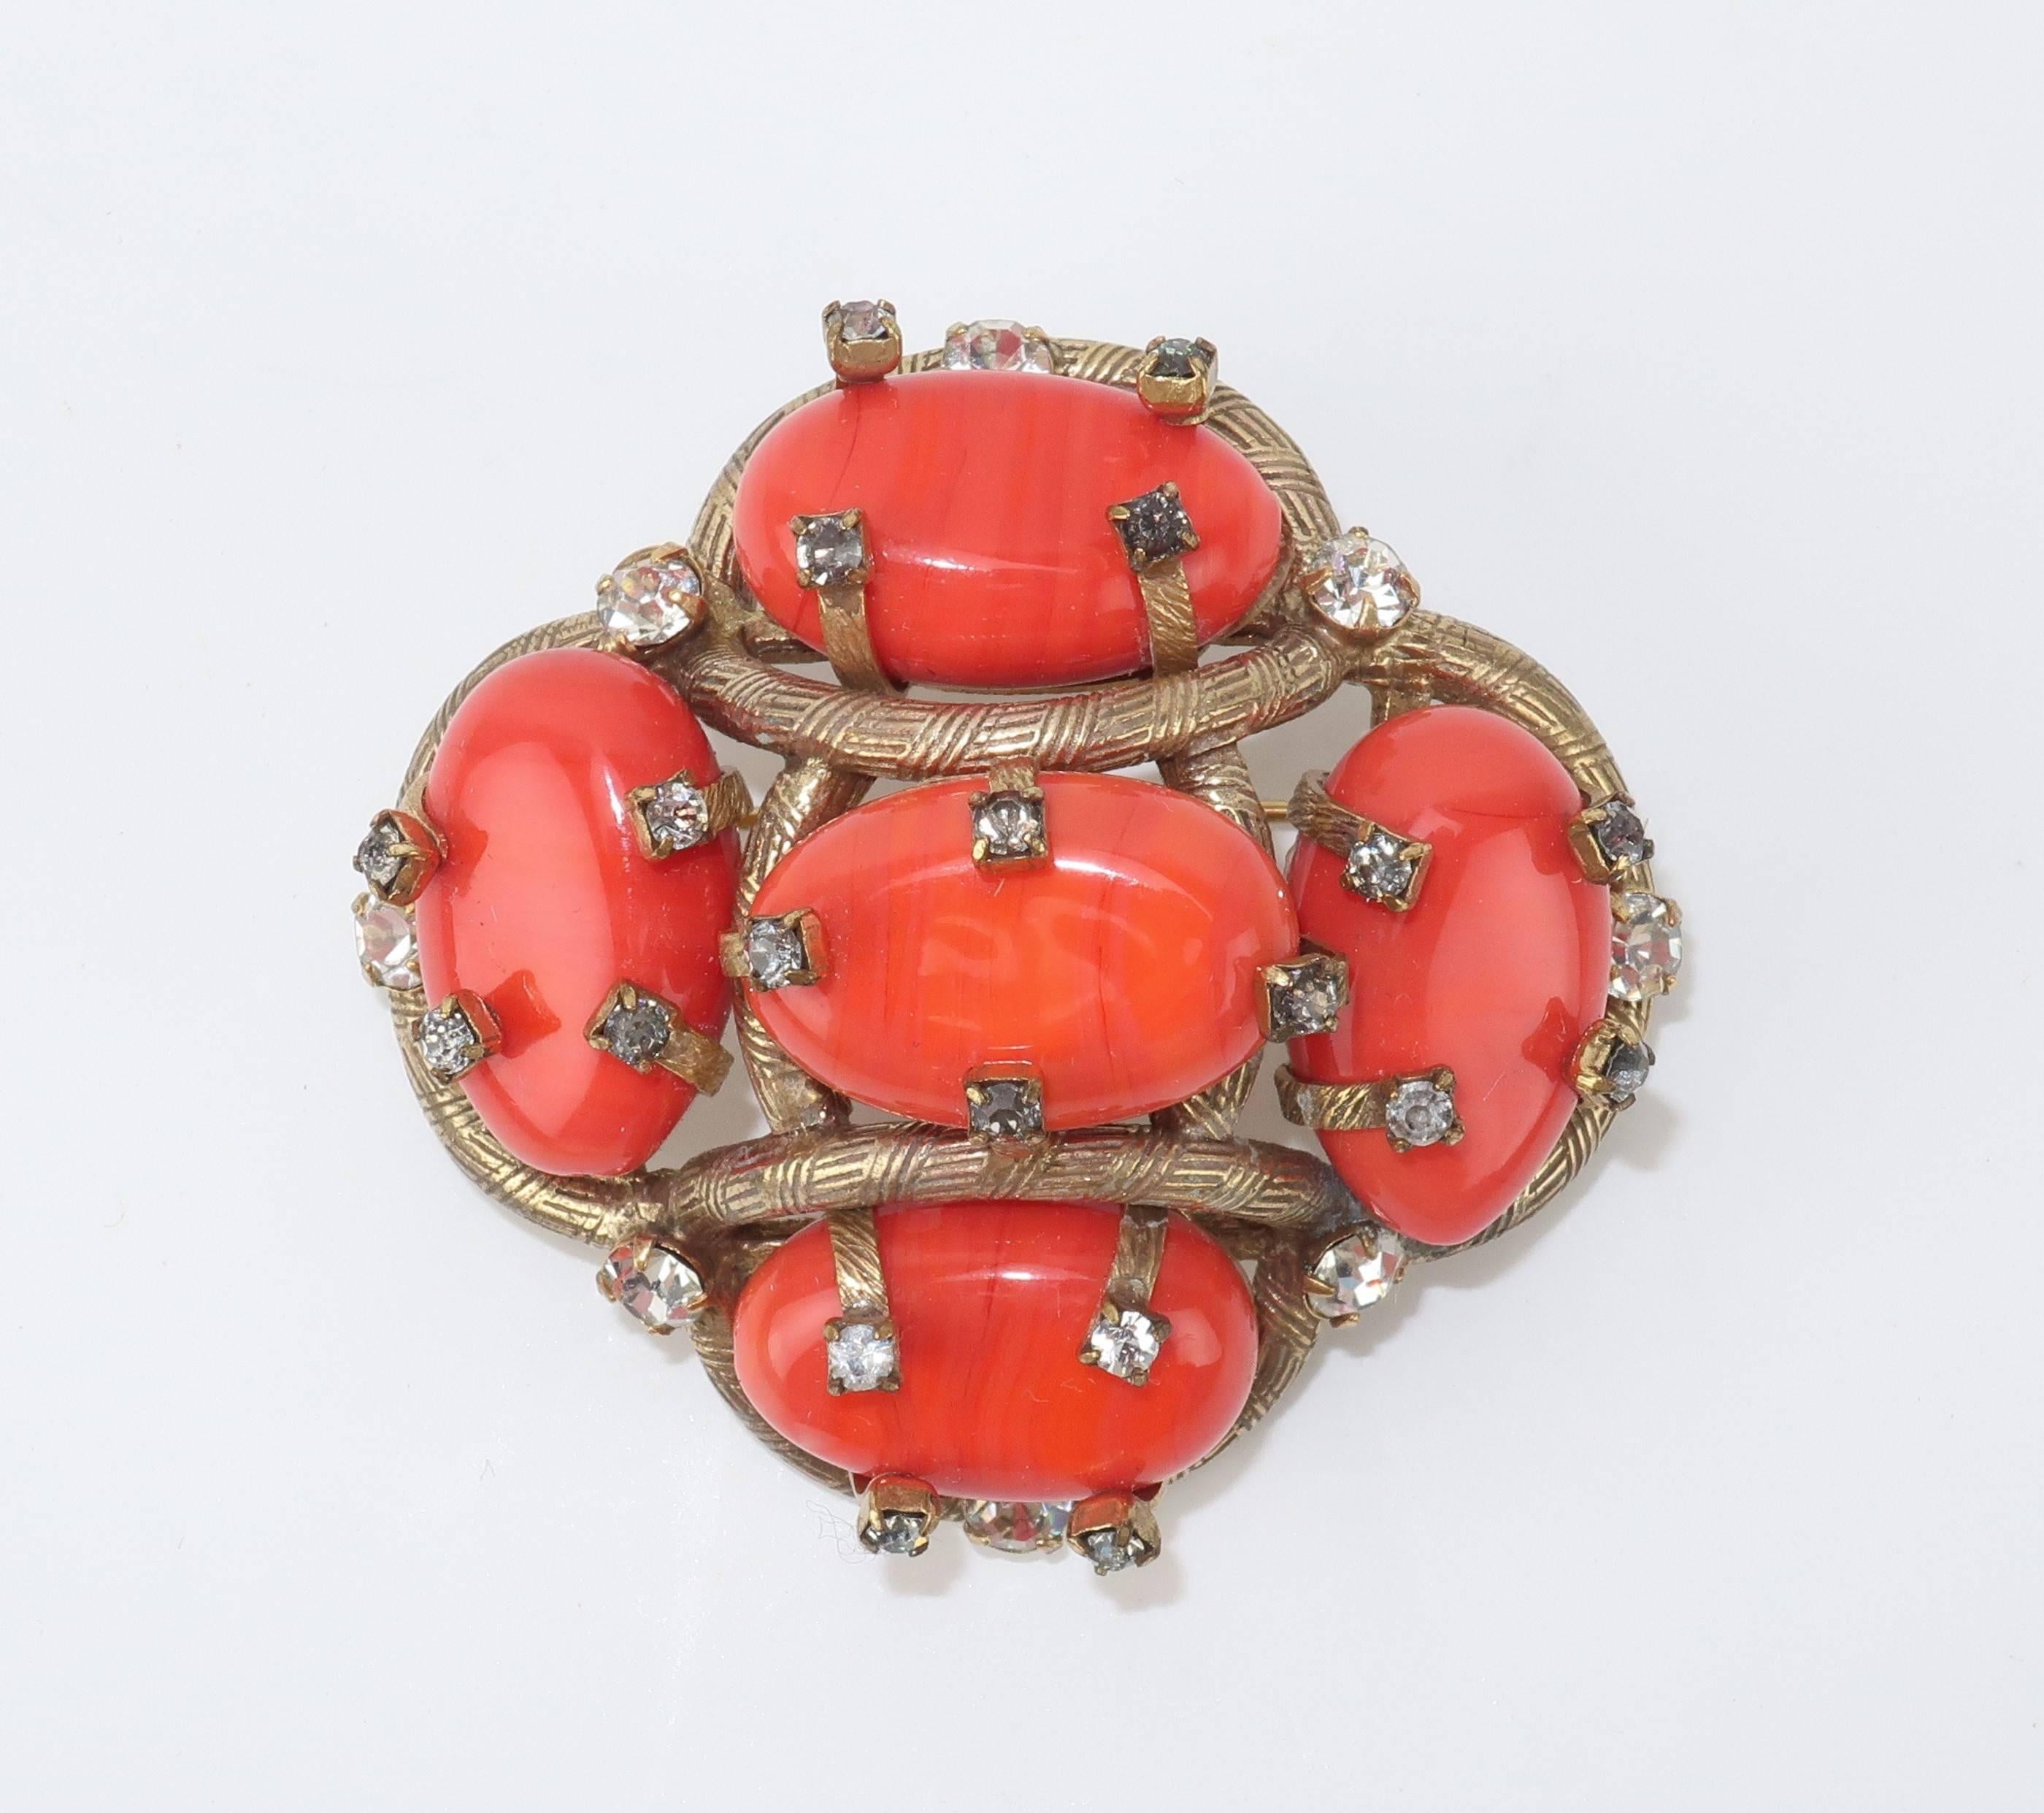 Rings of gold tone incised metal are braided with crystal rhinestones to create a beautiful frame for vibrant coral glass in this vintage brooch.  The straight pin and safety clasp work well to keep the brooch in place ... there is a slight bend to